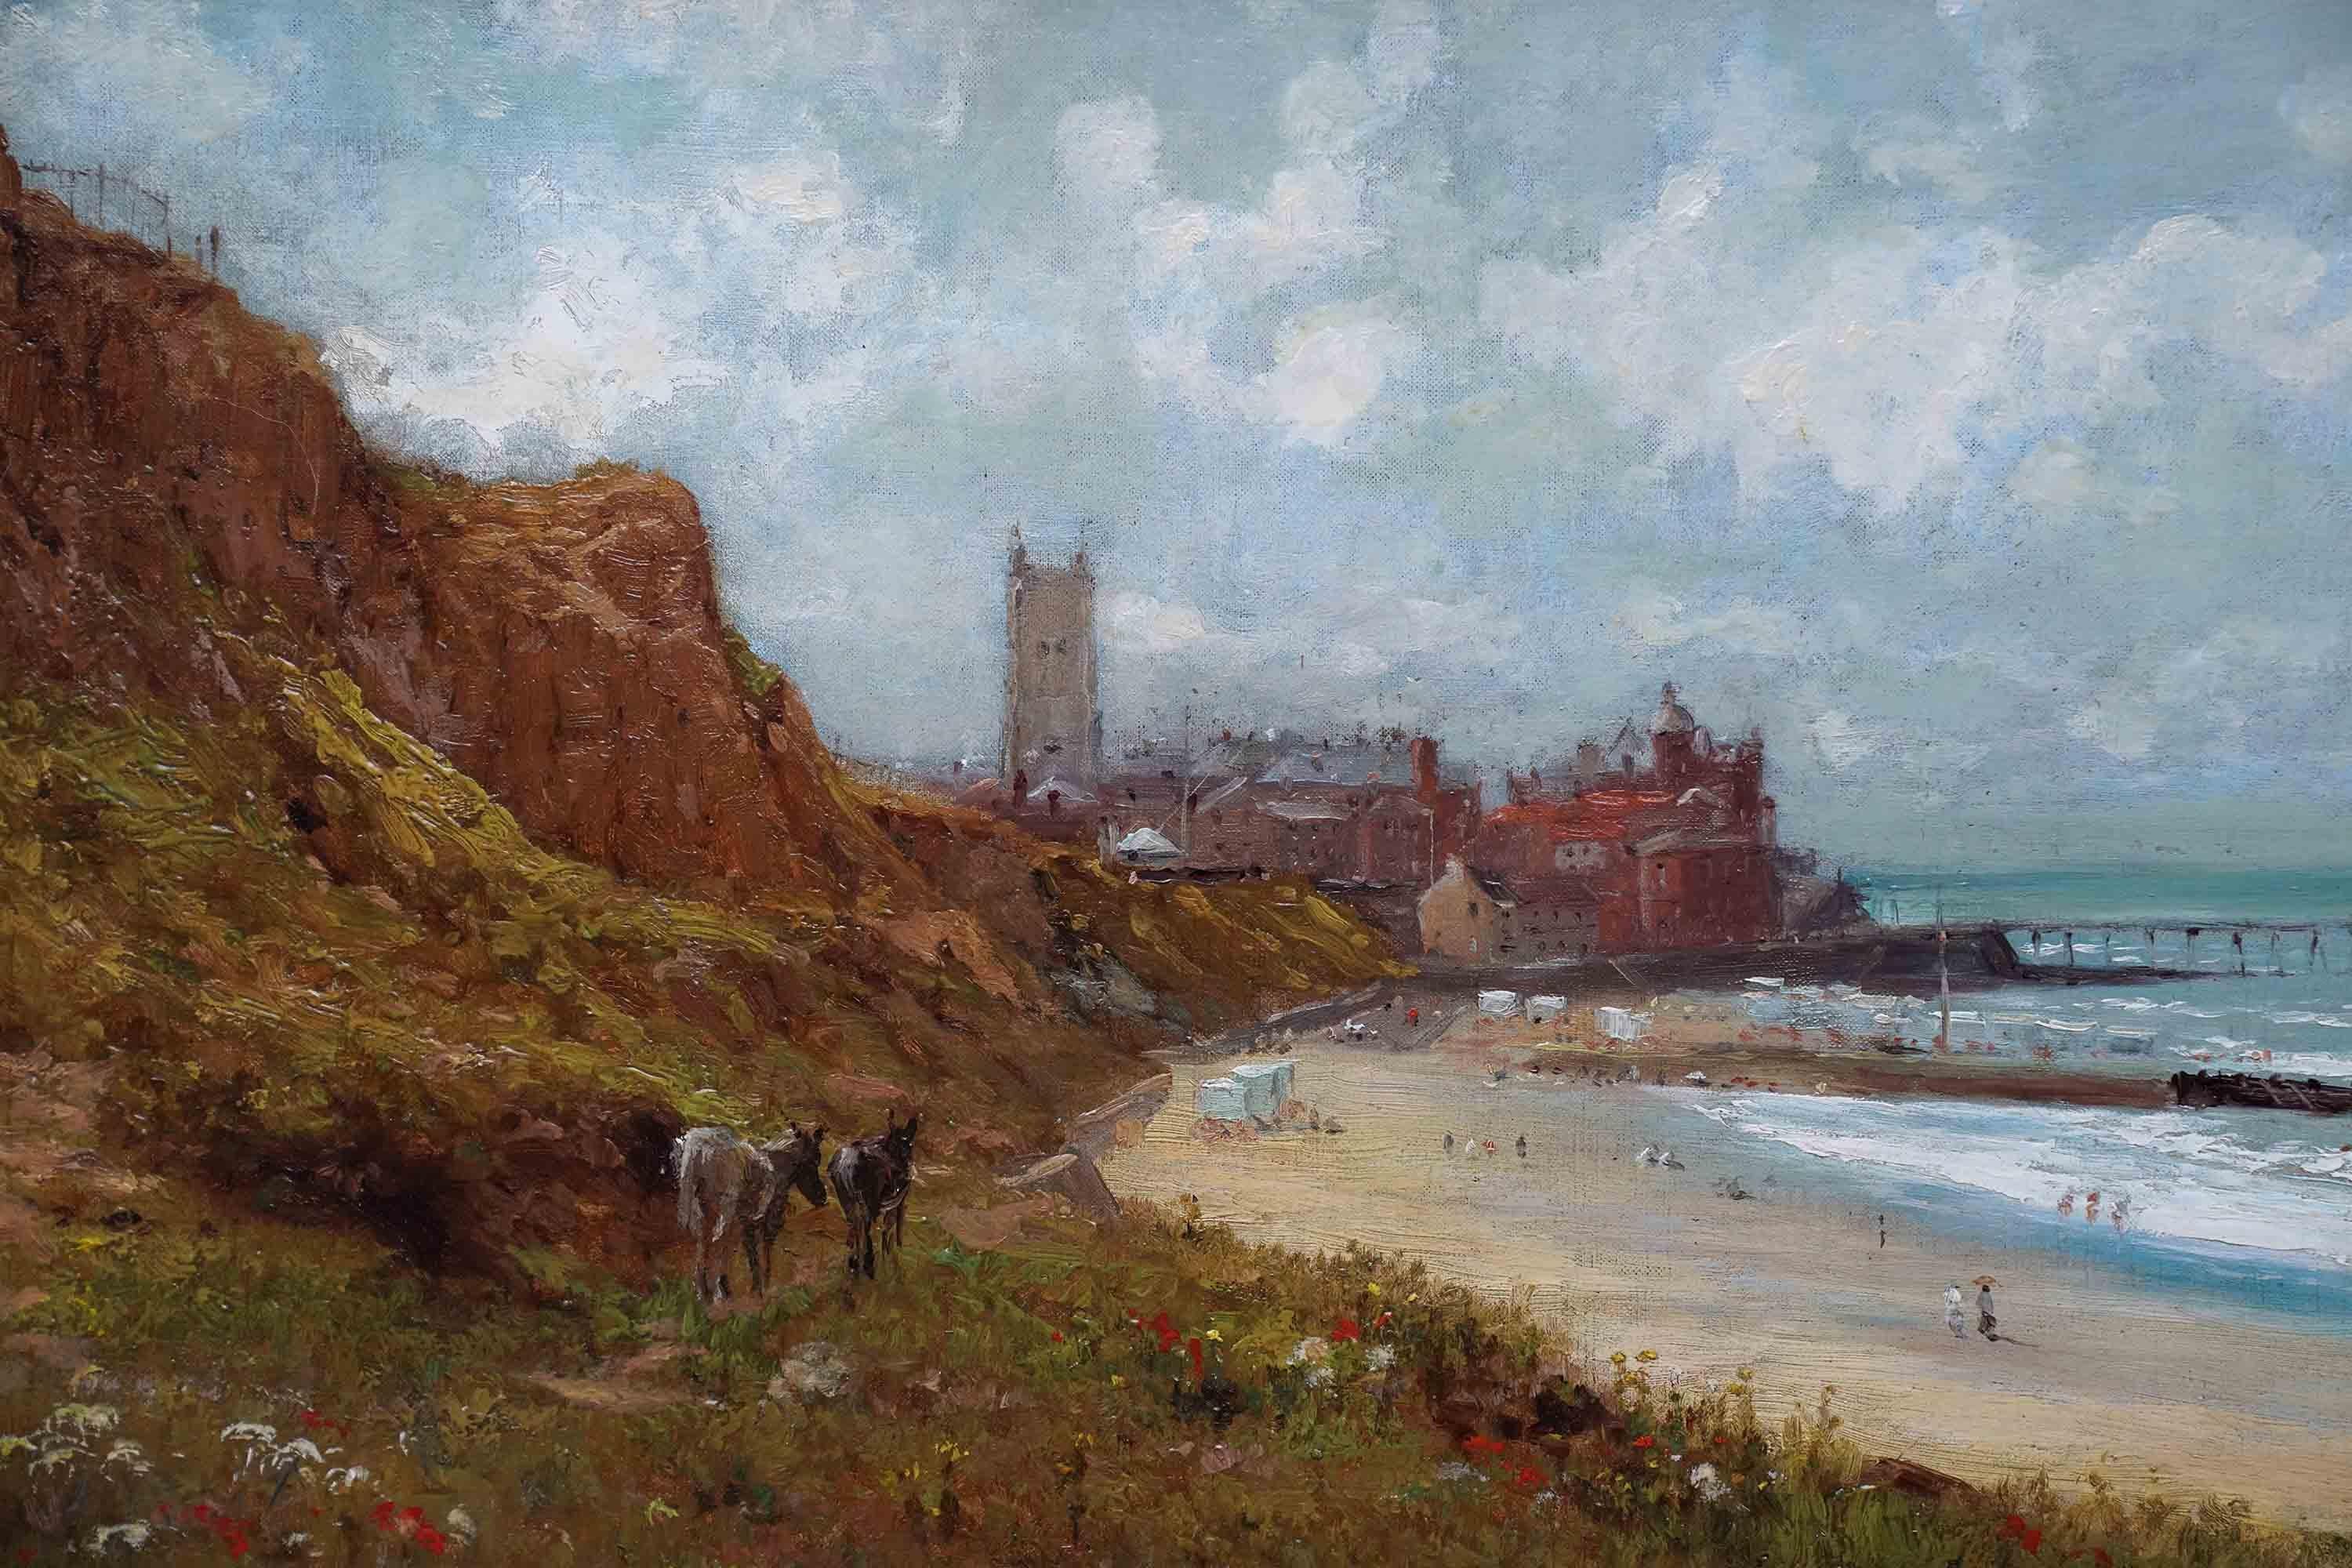 Cromer Coastal Landscape with Donkeys - British 19th century art oil painting - Impressionist Painting by Robert Finlay McIntrye